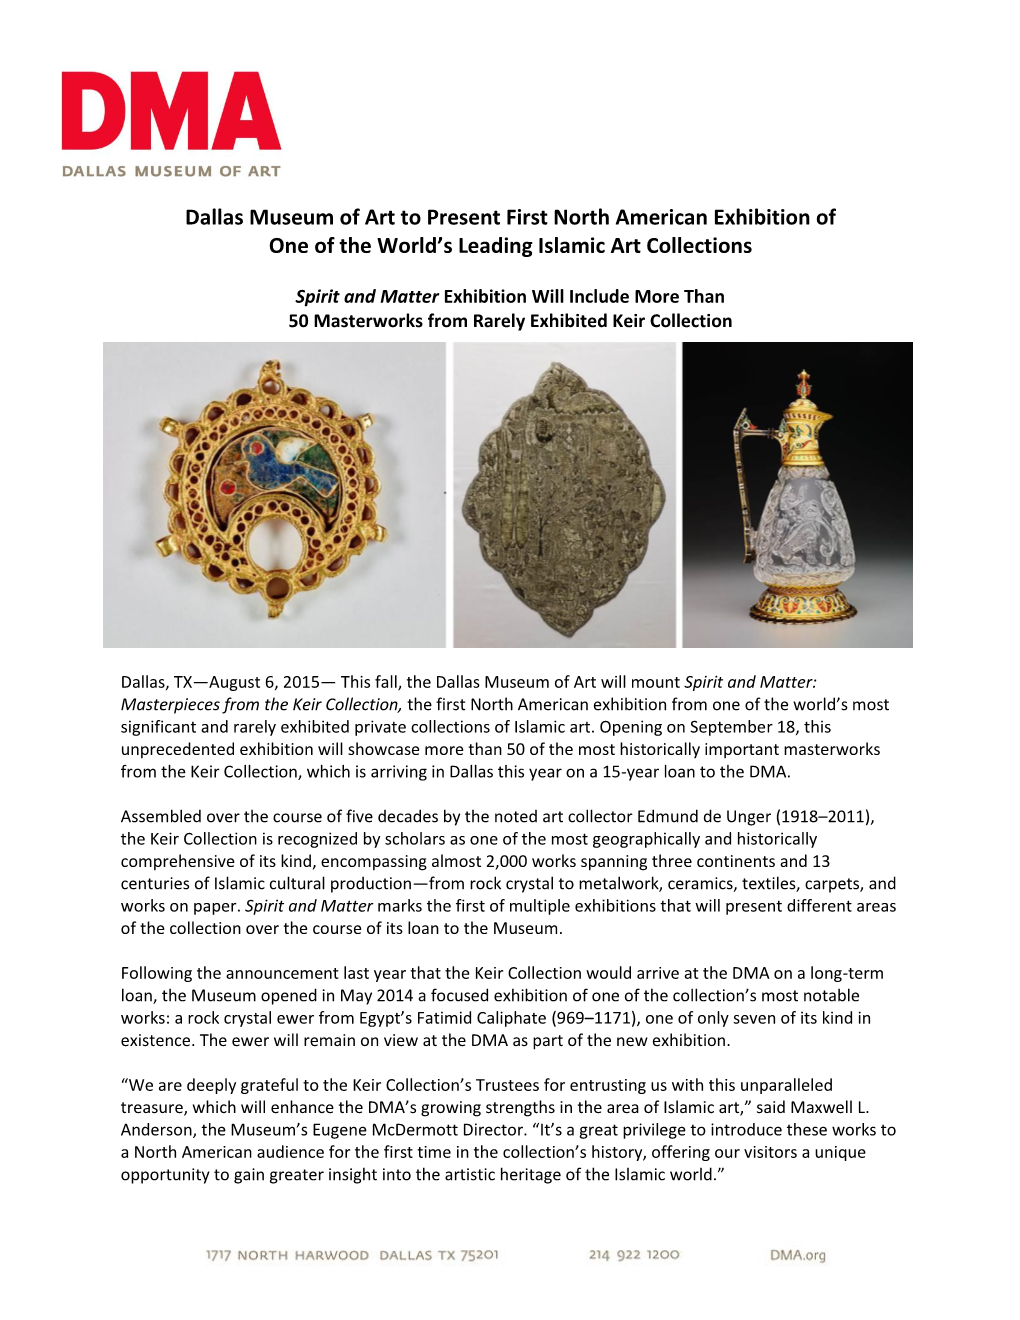 Dallas Museum of Art to Present First North American Exhibition of One of the World’S Leading Islamic Art Collections